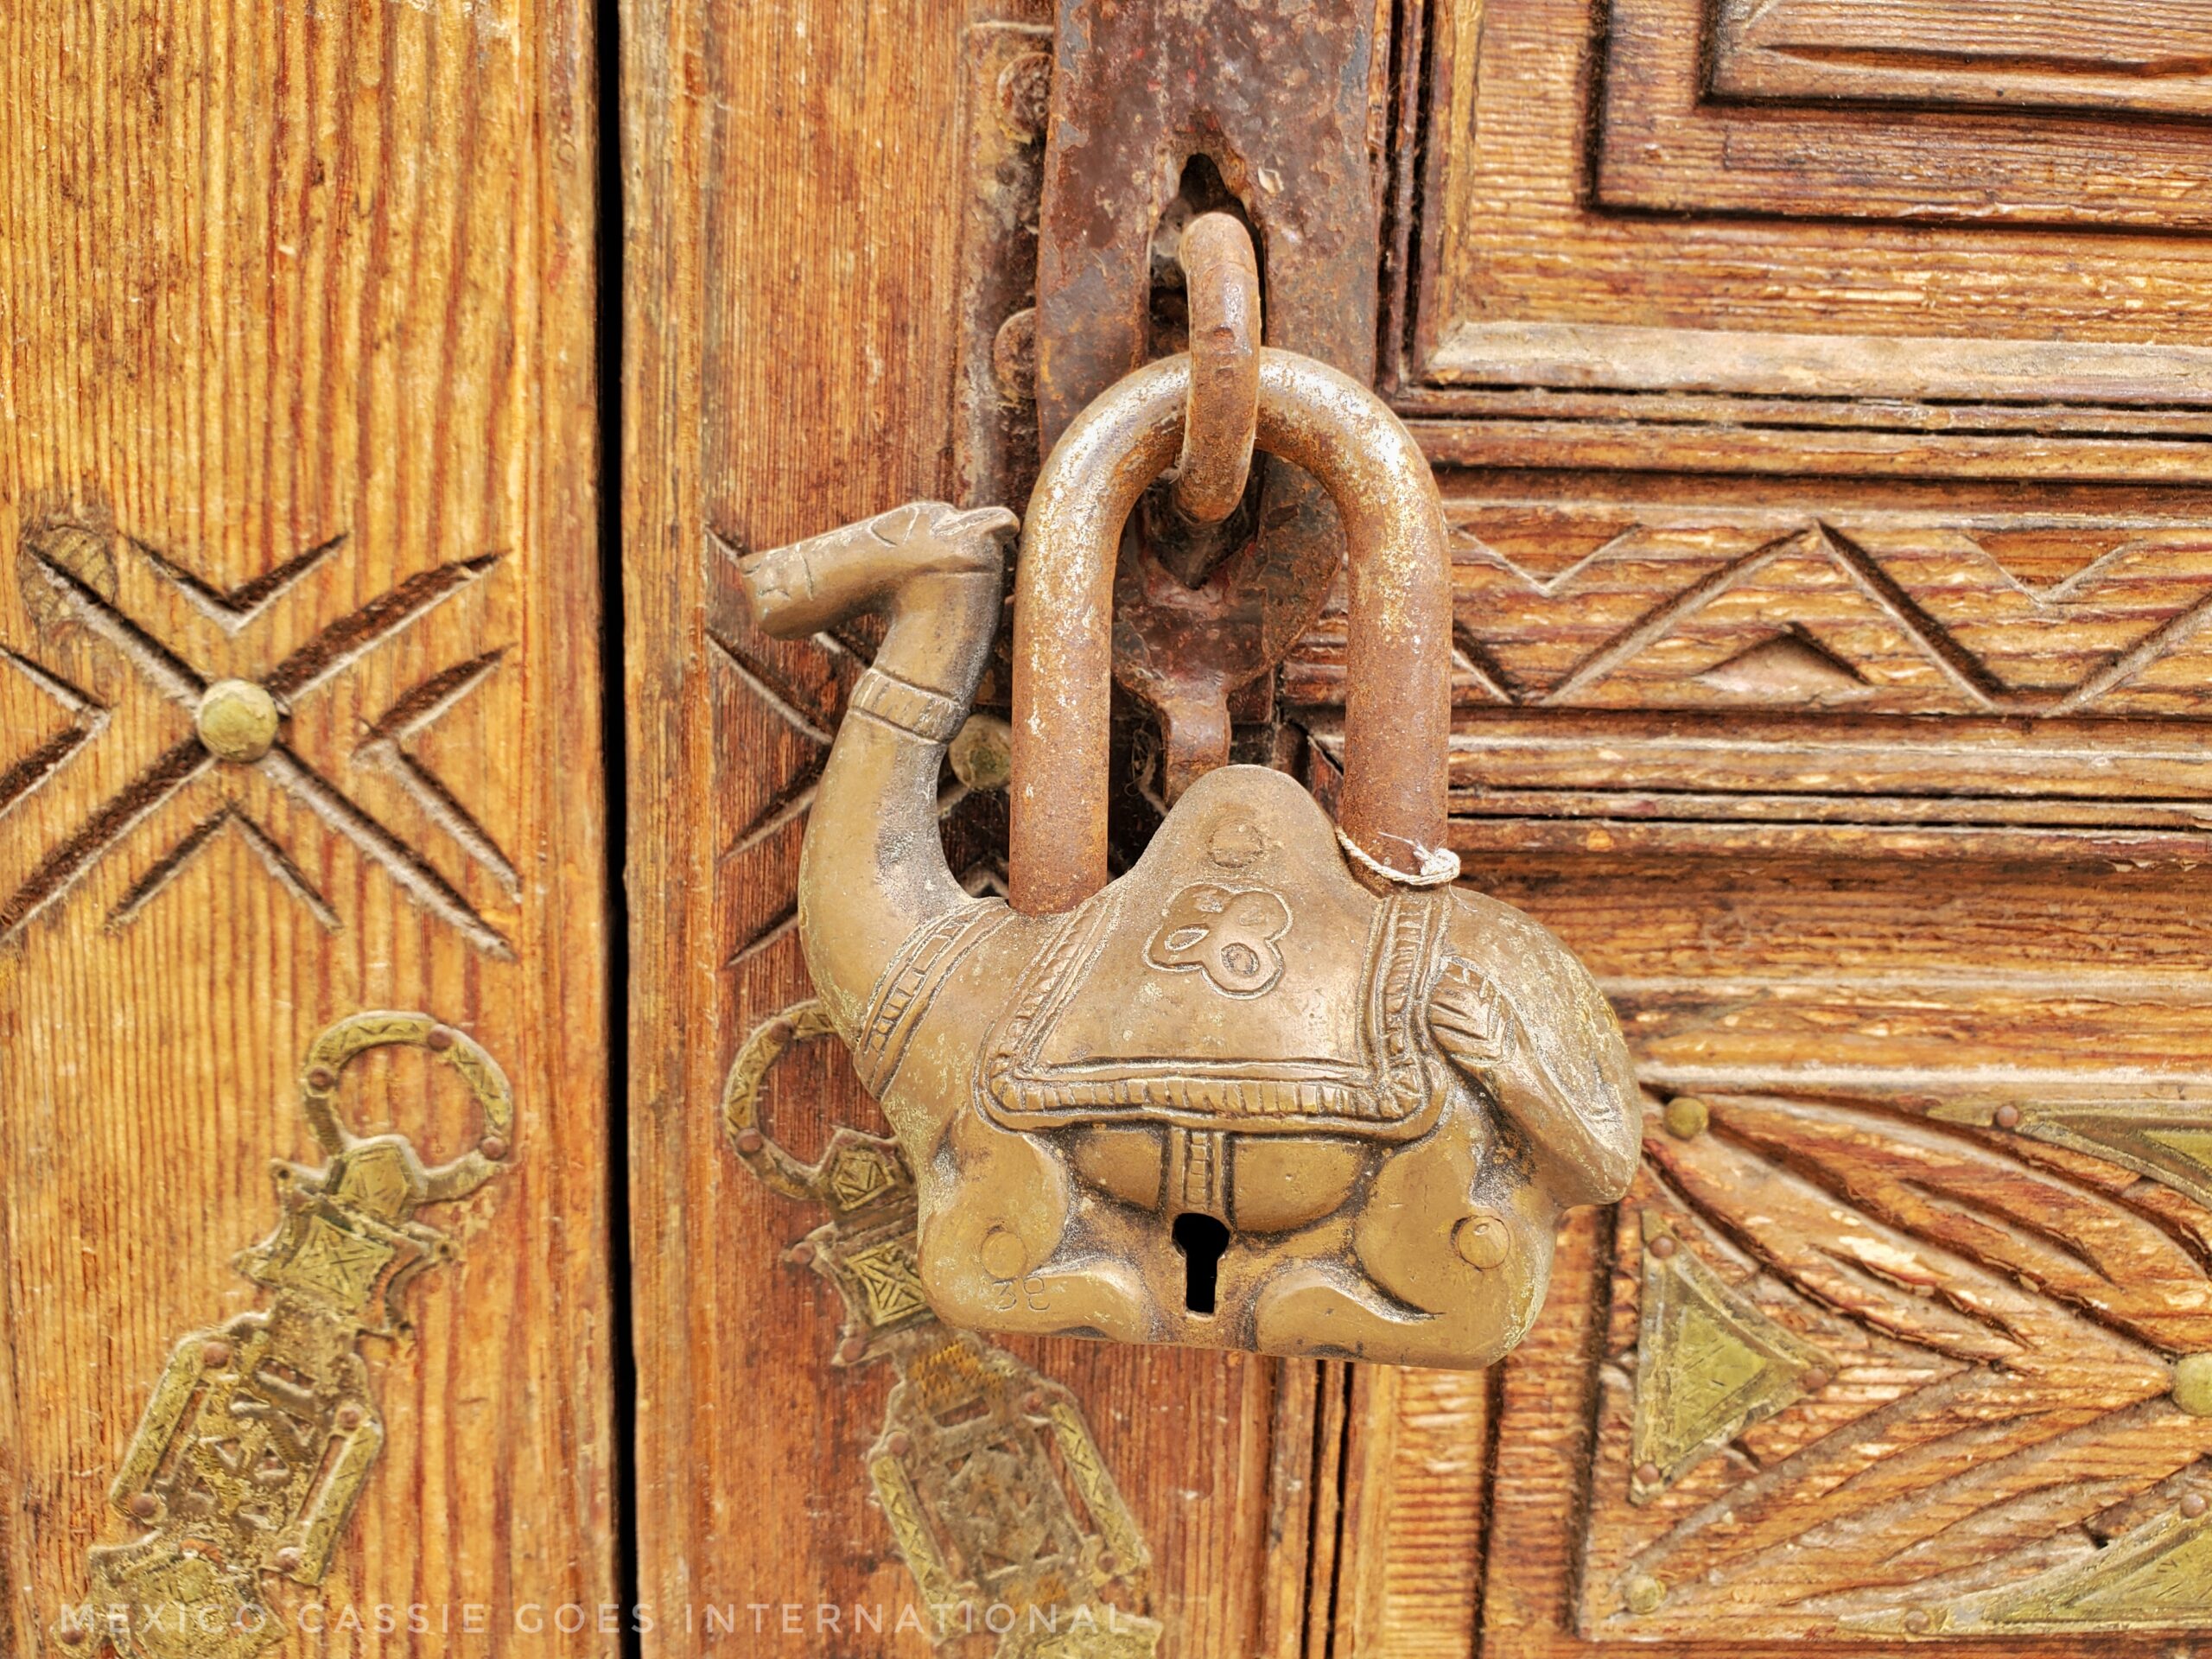 camel shaped lock hanging on a wooden door